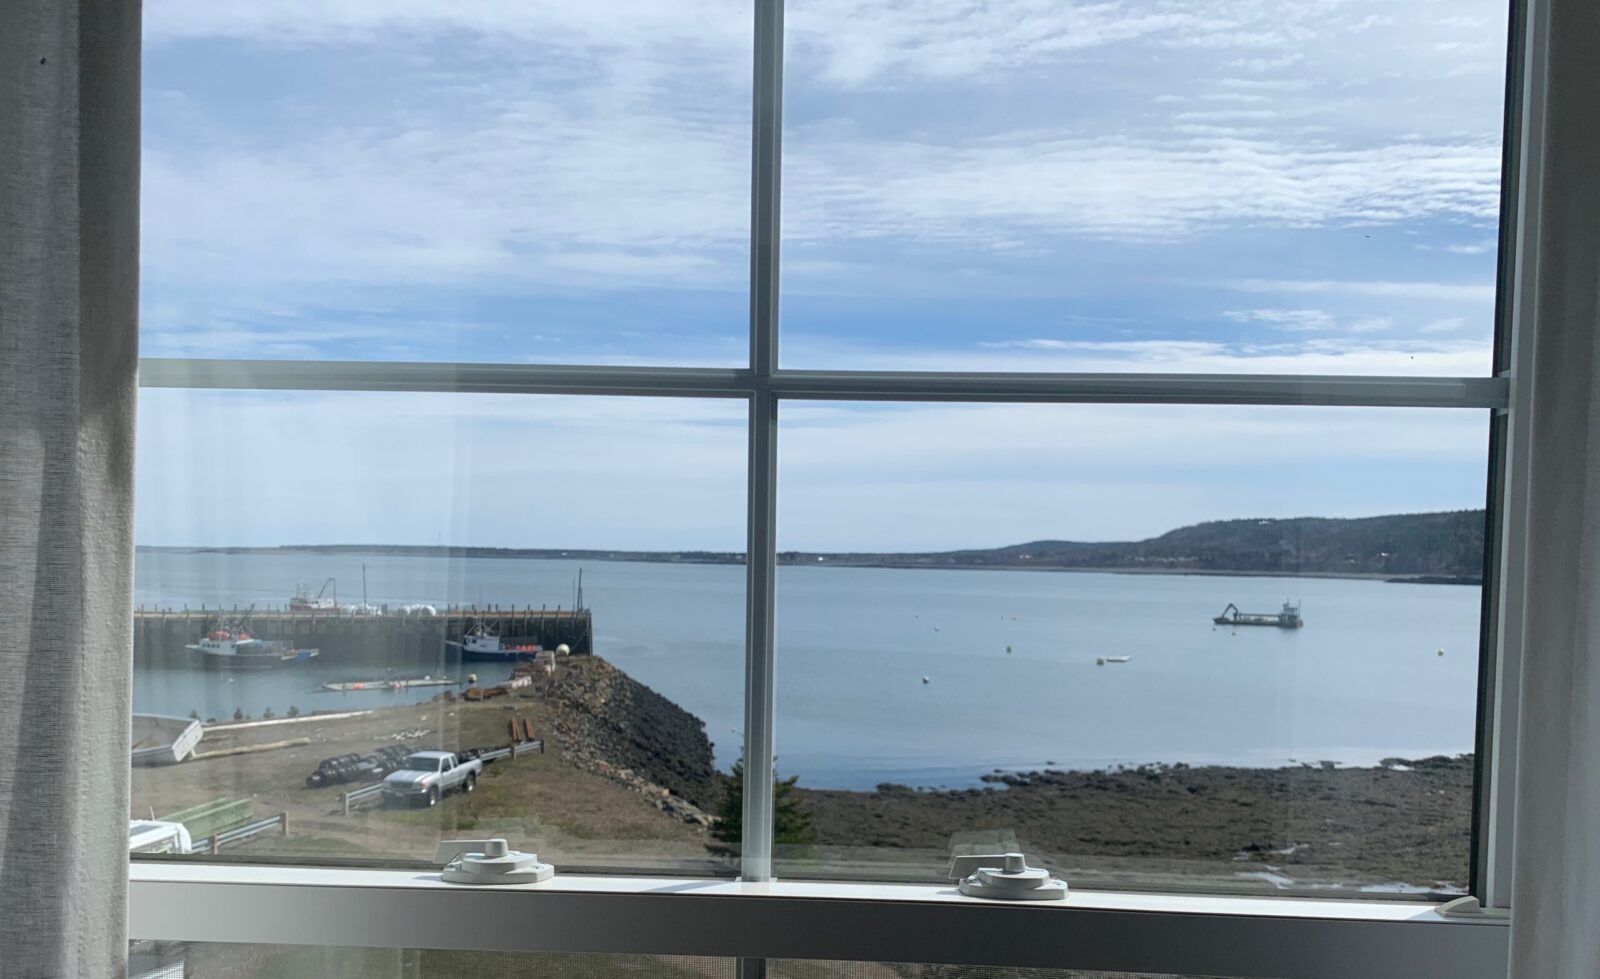 A window with a view of a harbor and a boat.